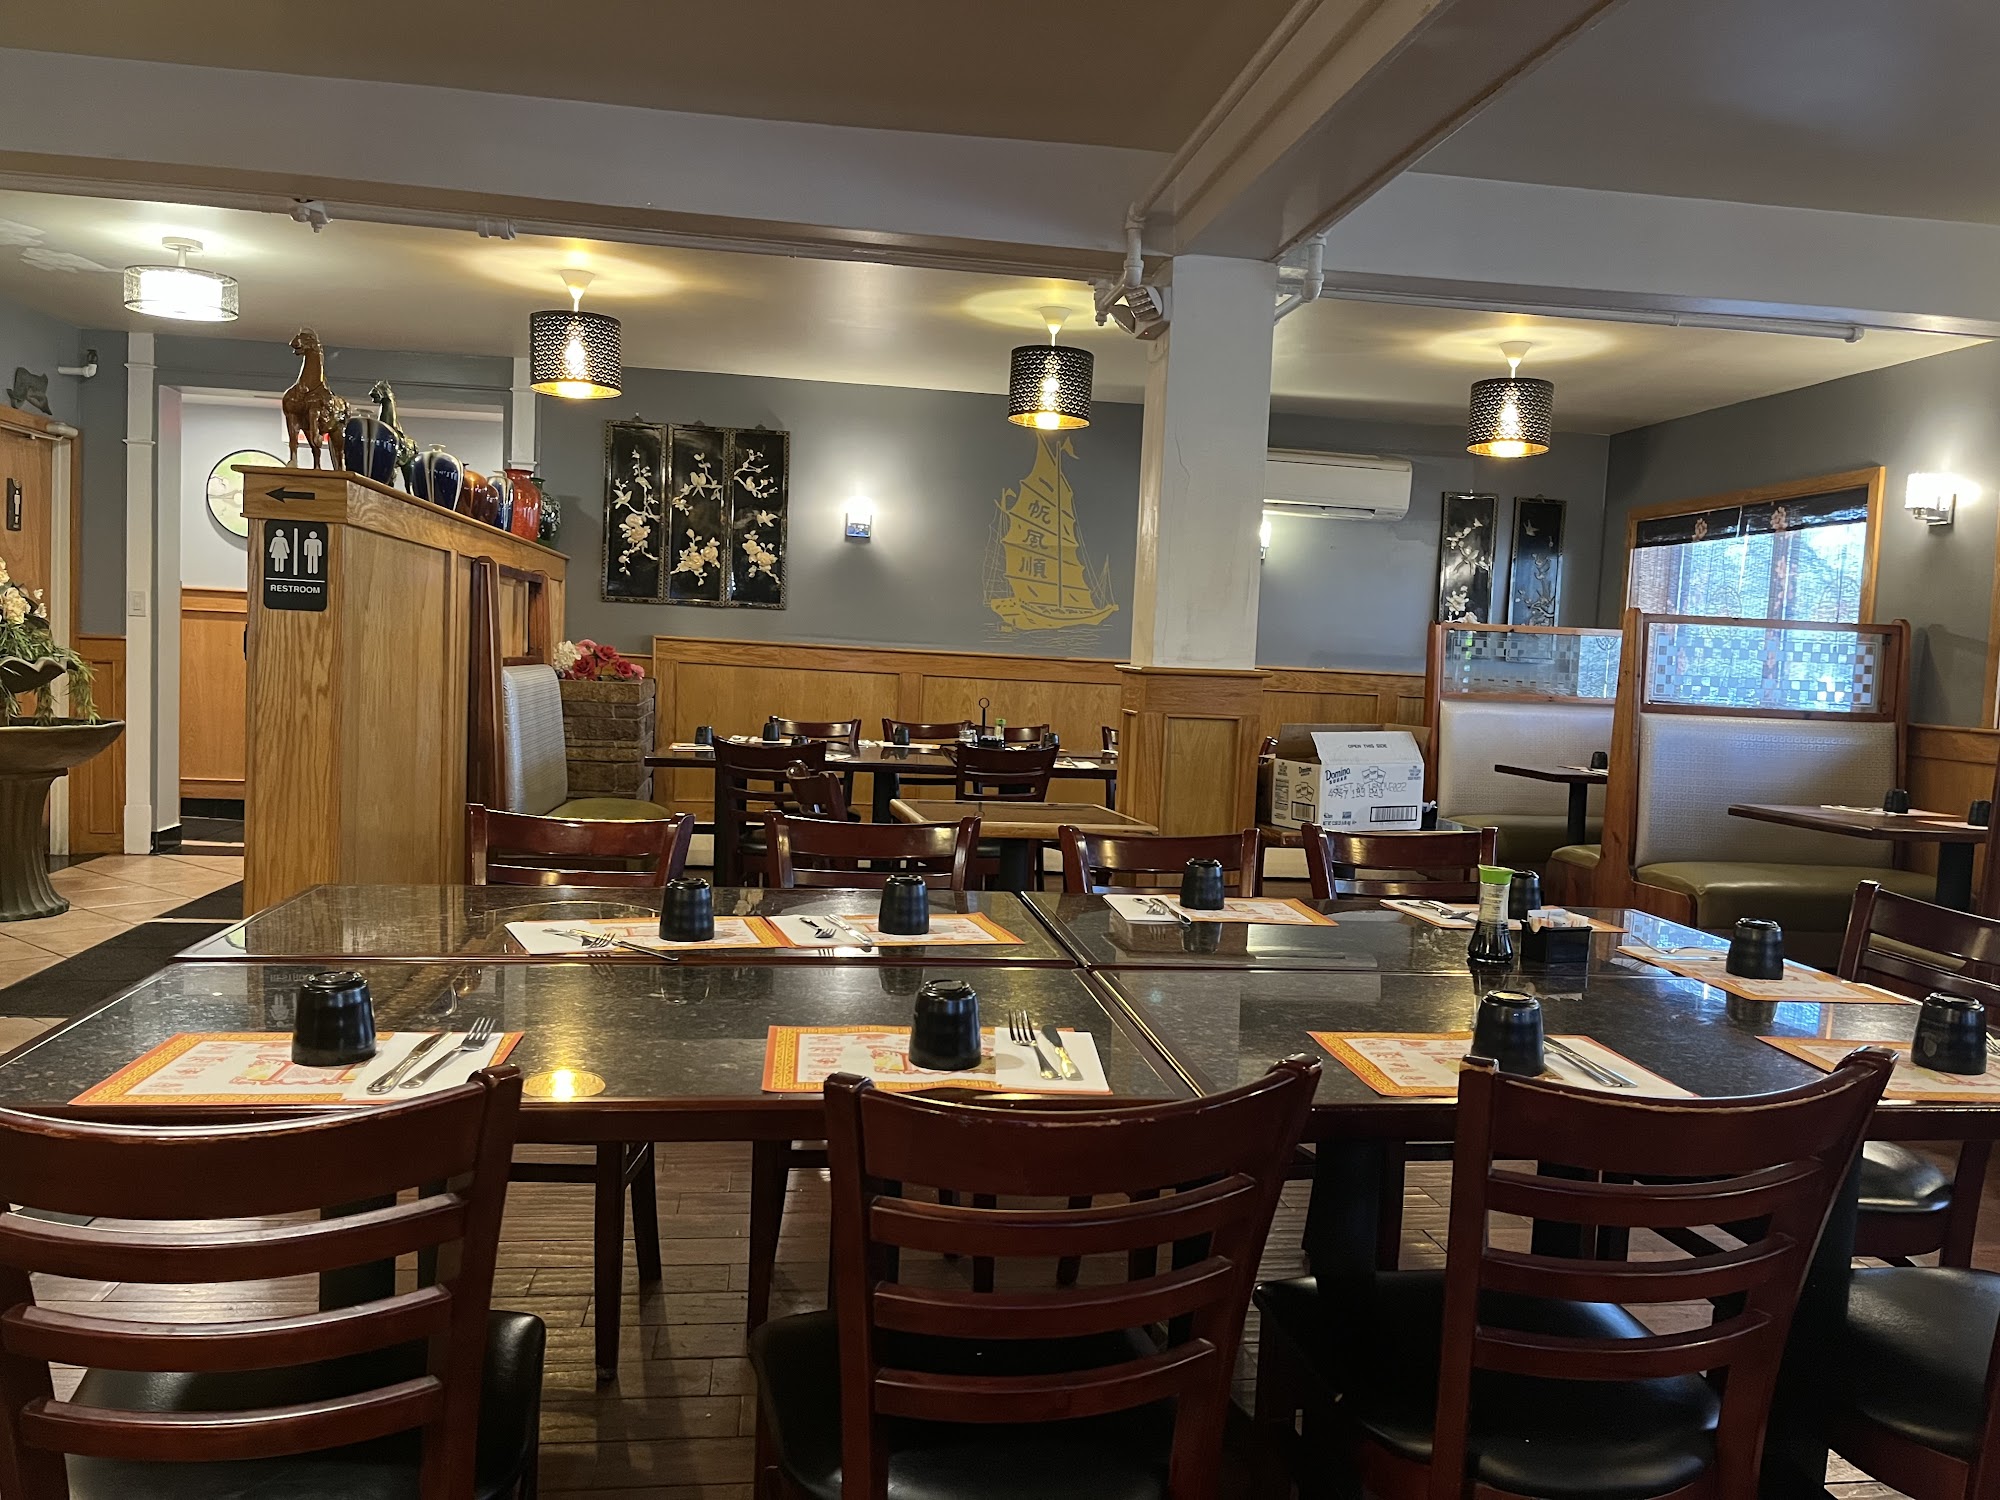 Golden Sails Chinese Restaurant 金航 143-145 E Falmouth Hwy, East Falmouth, MA 02536